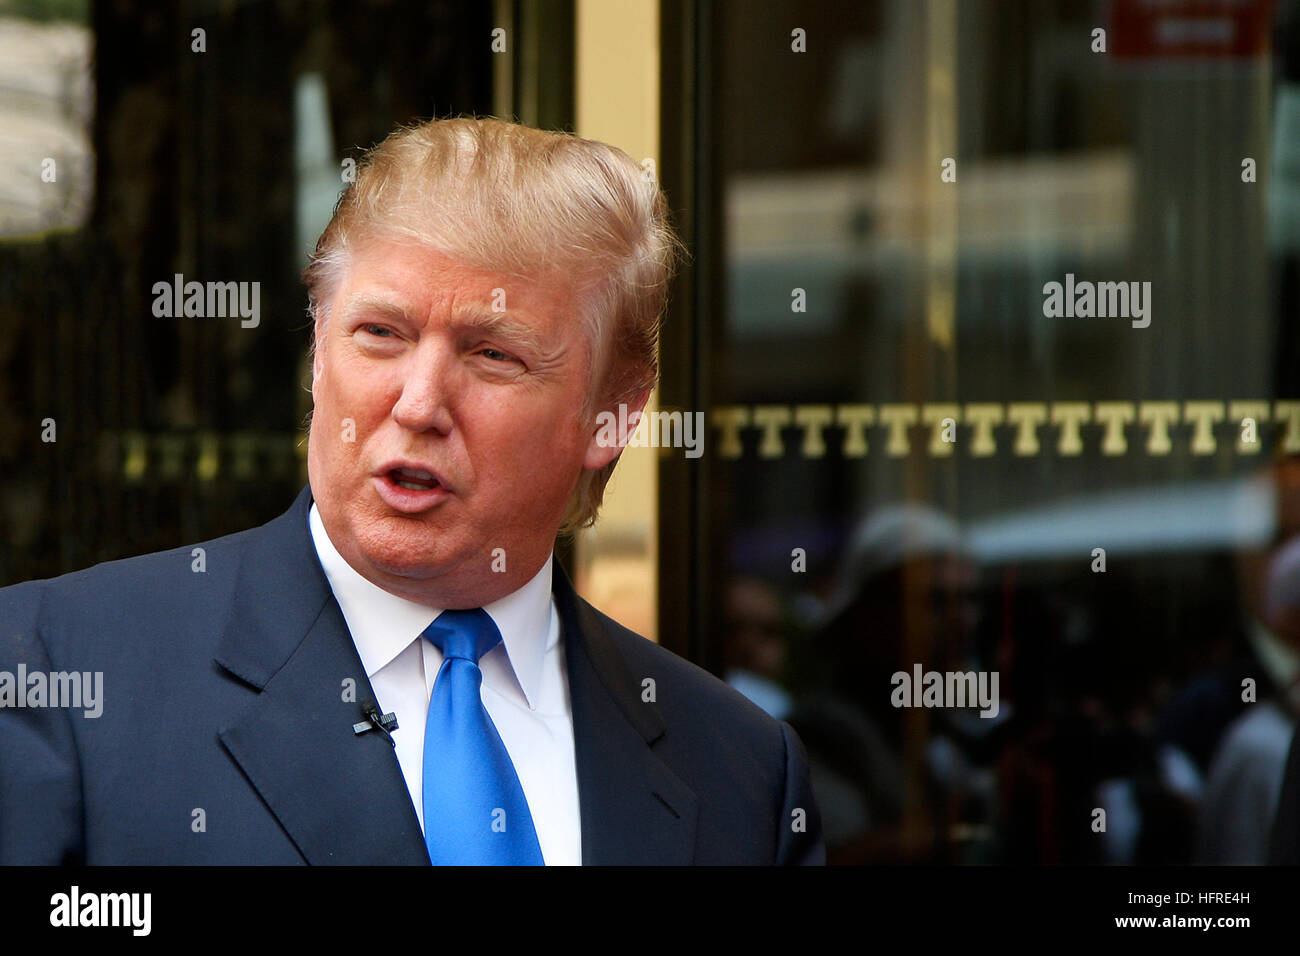 Portrait of President Donald Trump recording on 5th Avenue in front of Trump Tower in New York City. Stock Photo